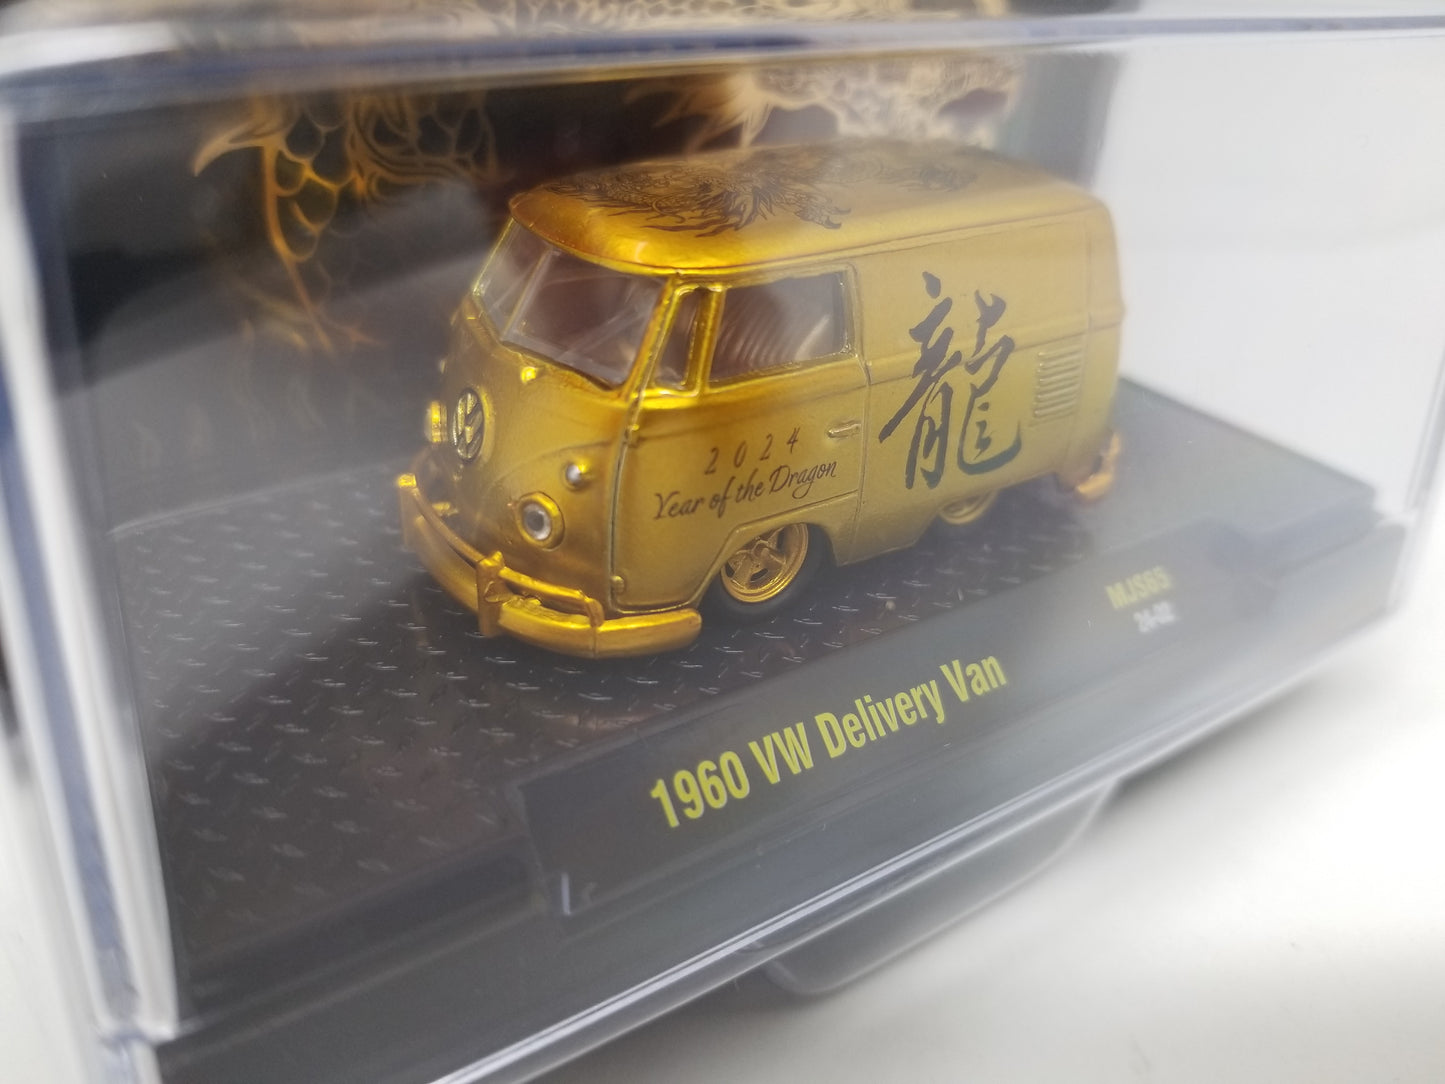 M2 1960 VW Delivery Van - Year of the Dragon - Gold